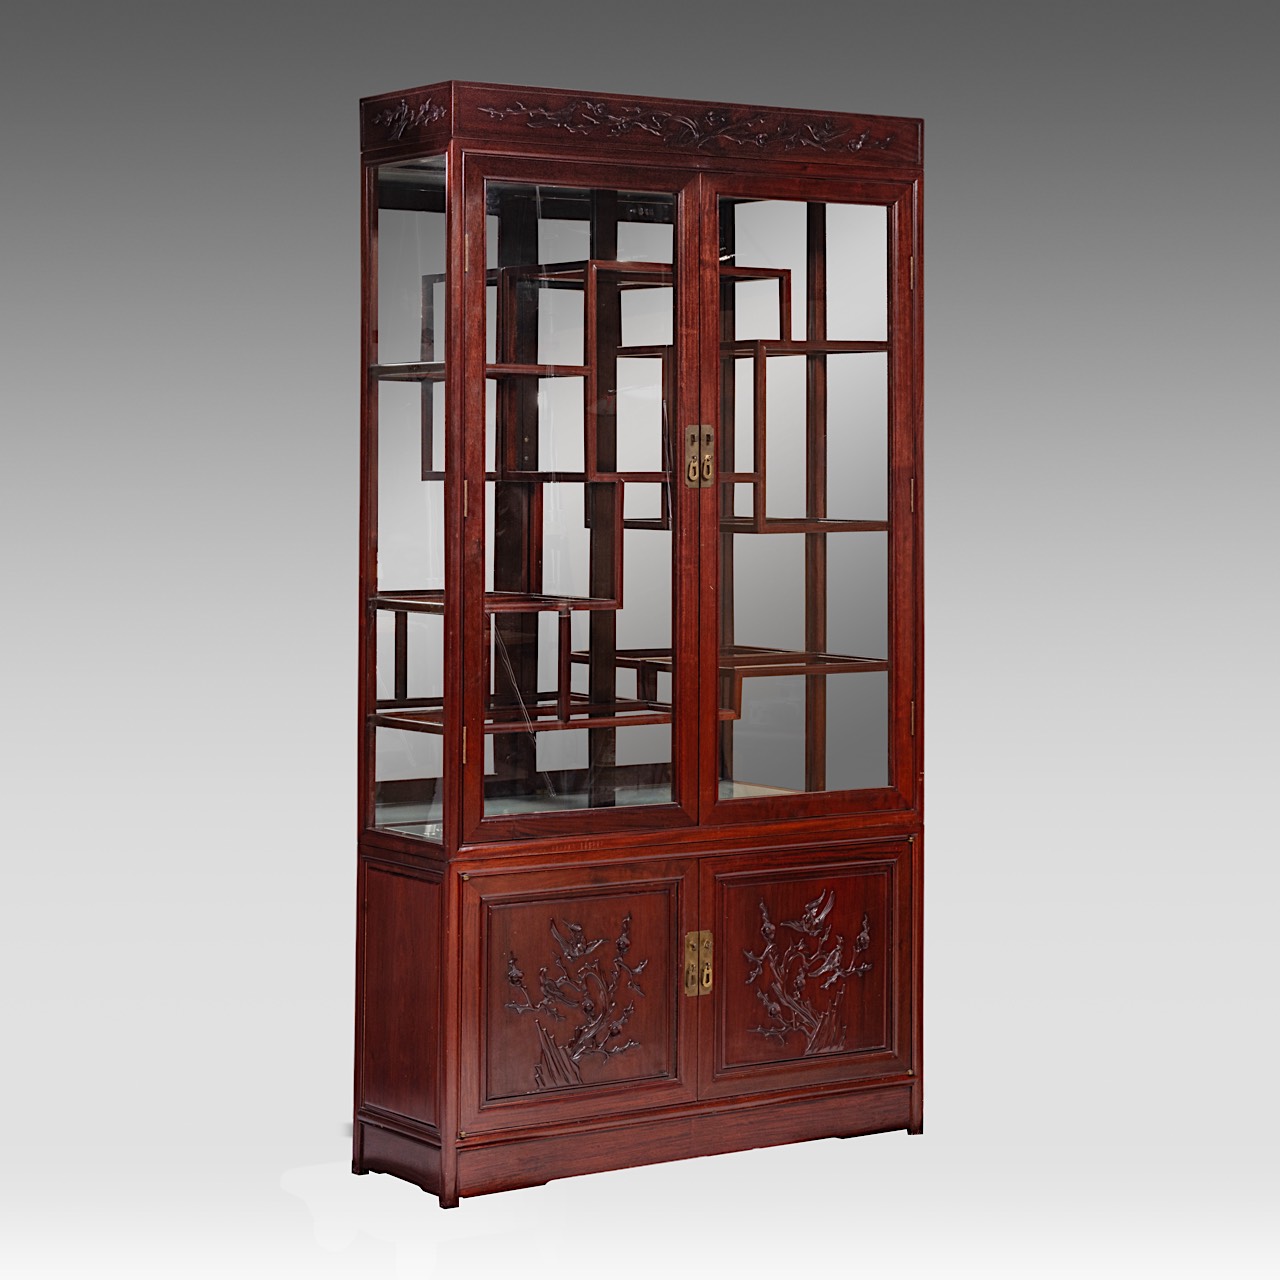 A Chinese hardwood display cabinet, with glass doors, 20thC, H 192 - W 102 - 33,5 cm - Image 2 of 5